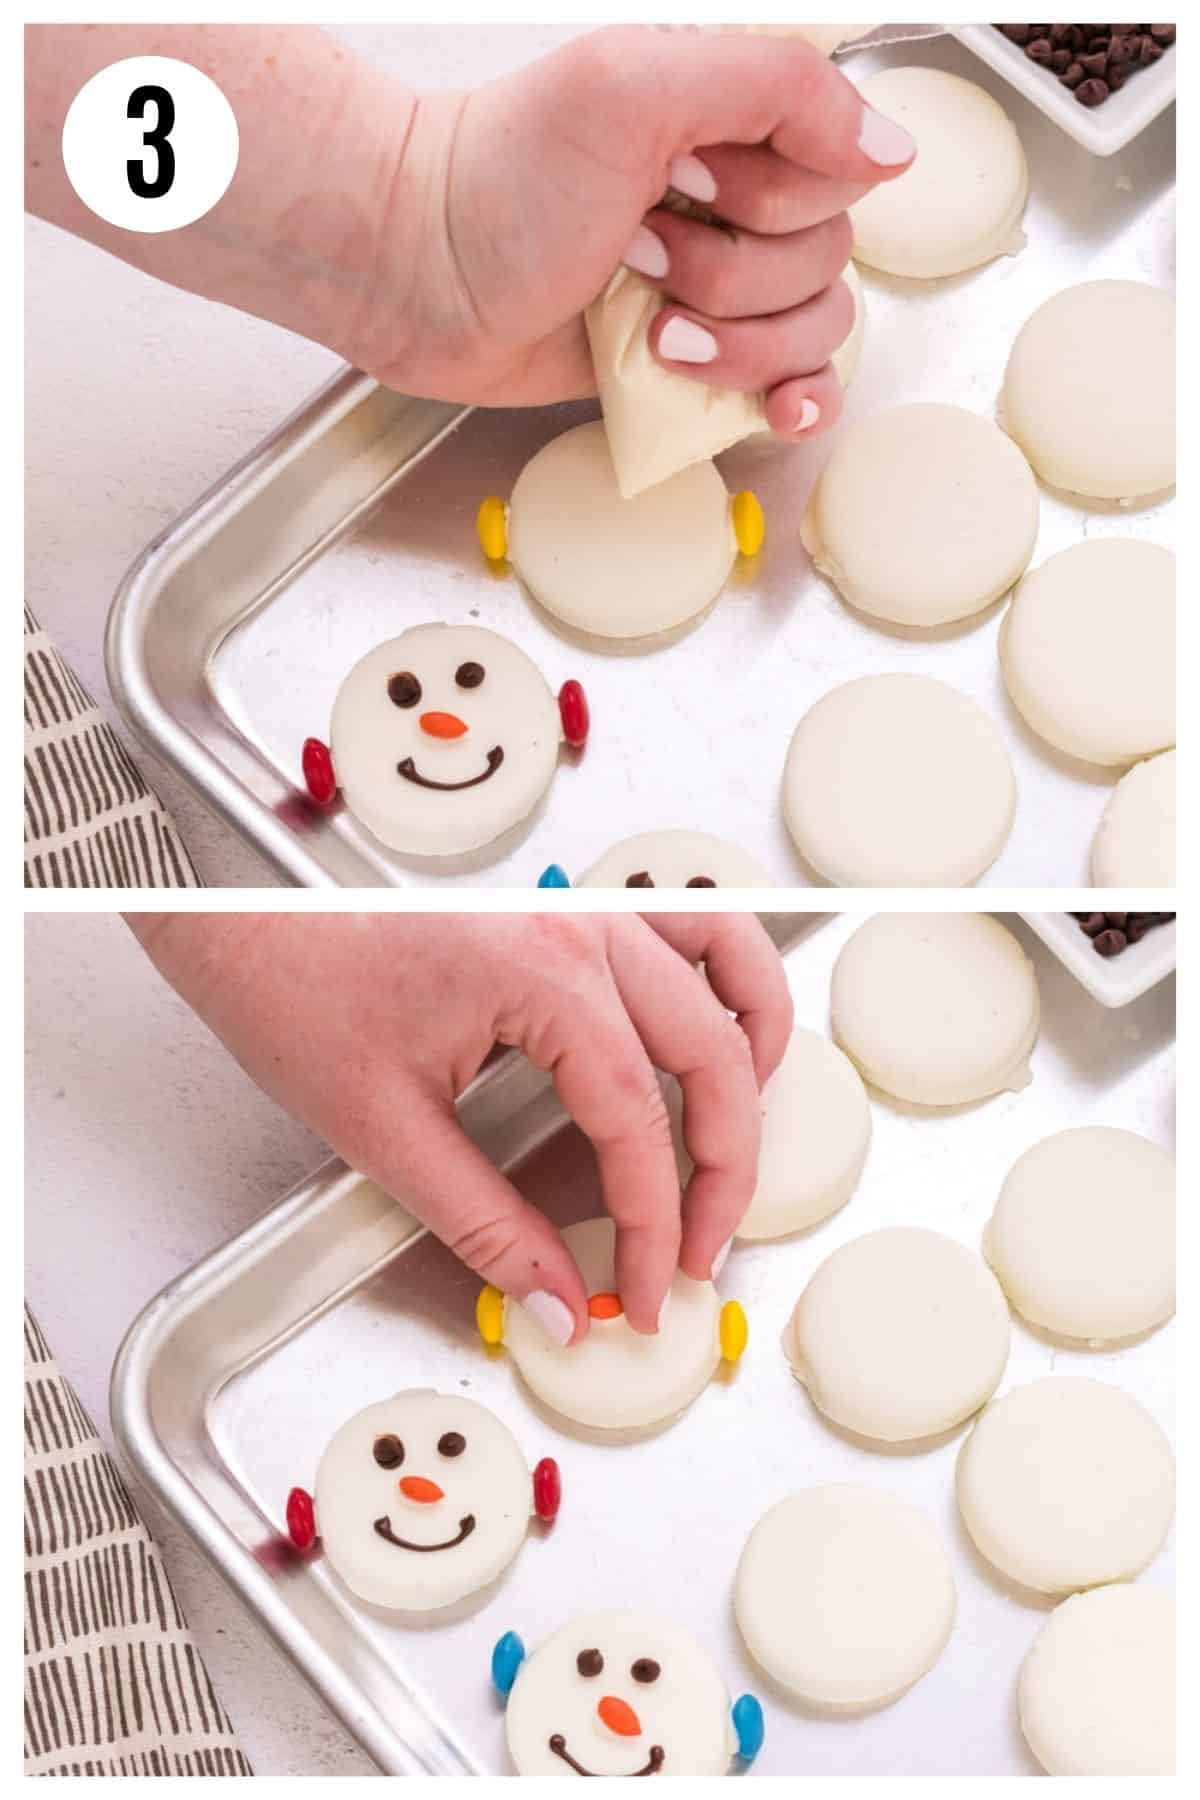 Hands showing bag of melted white chocolate being squeezed on center of white chocolate covered Oreo cookie and then orange chocolate covered sunflower seed being added for snowman face nose. 